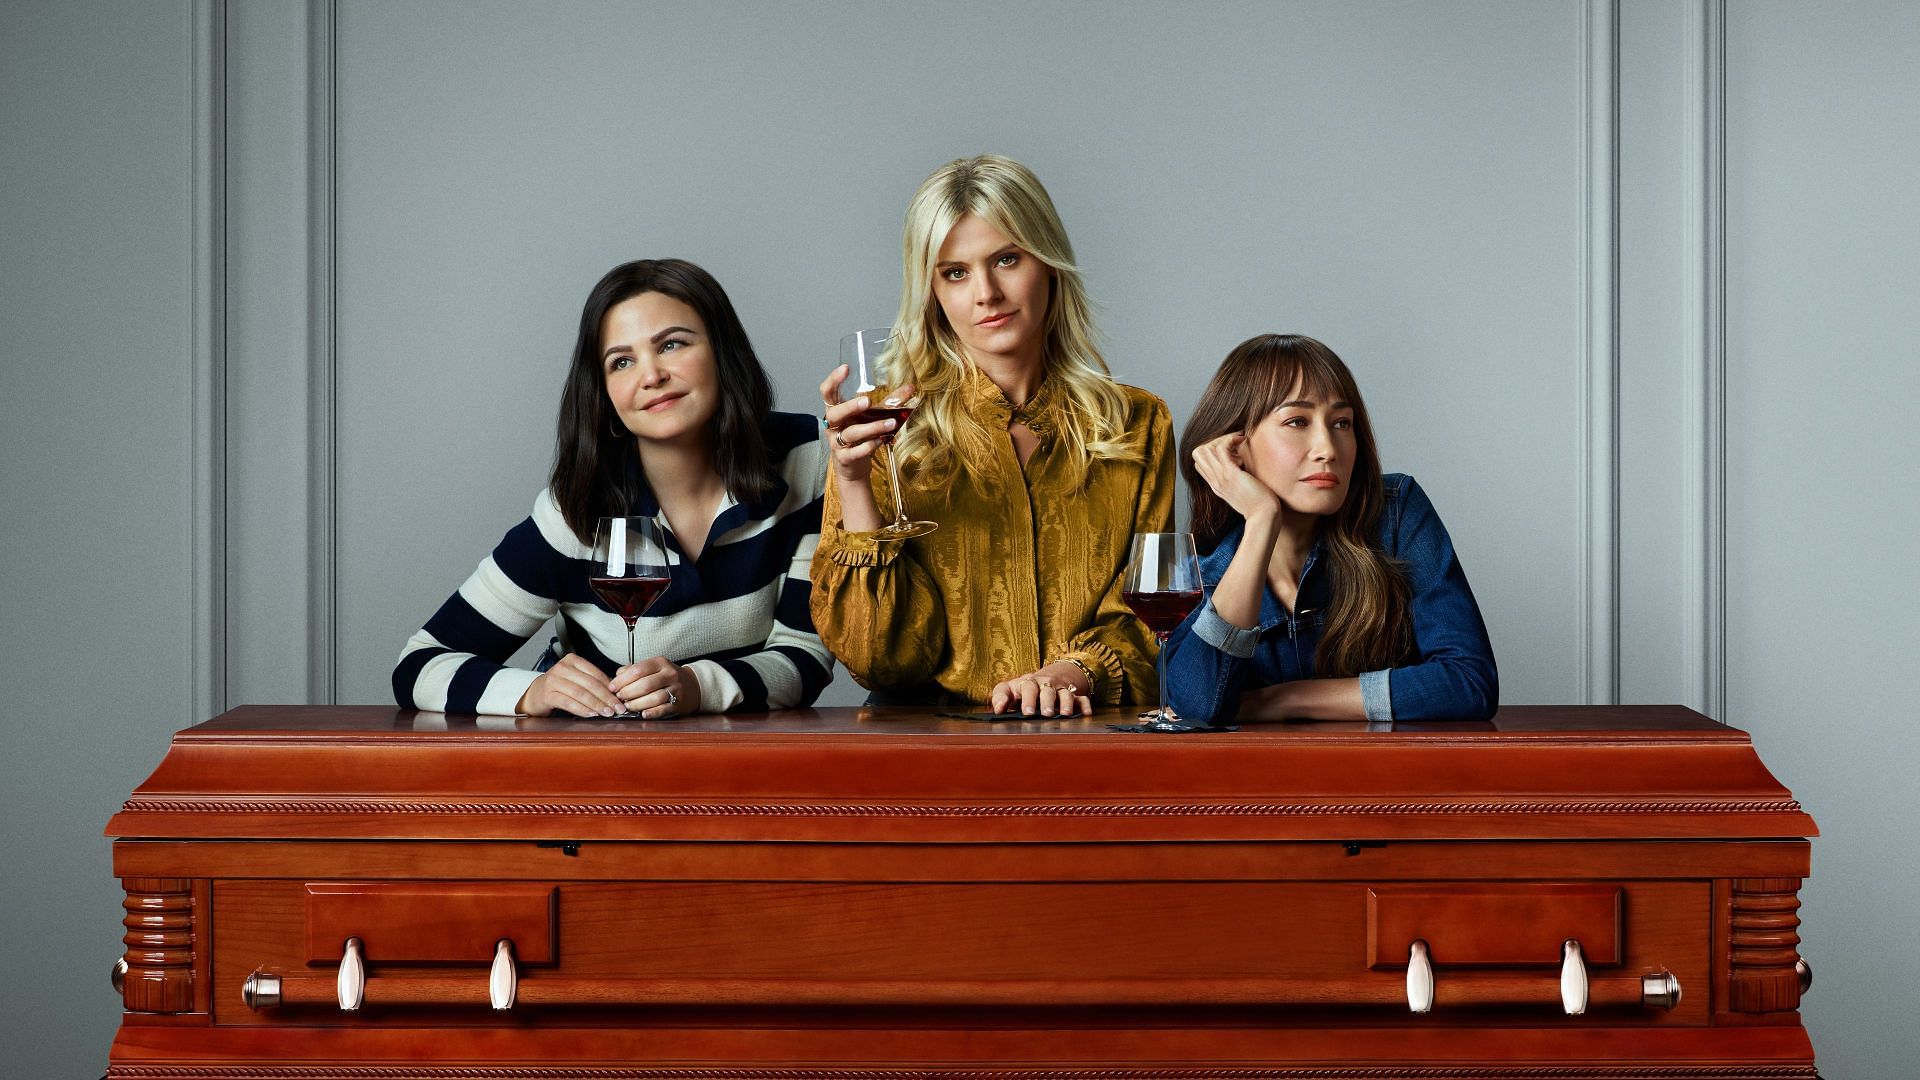 Eliza Coupe as Amy, Maggie Q as Sarah and Ginnifer Goodwin as Jodie in the new Fox series (Image via Fox)